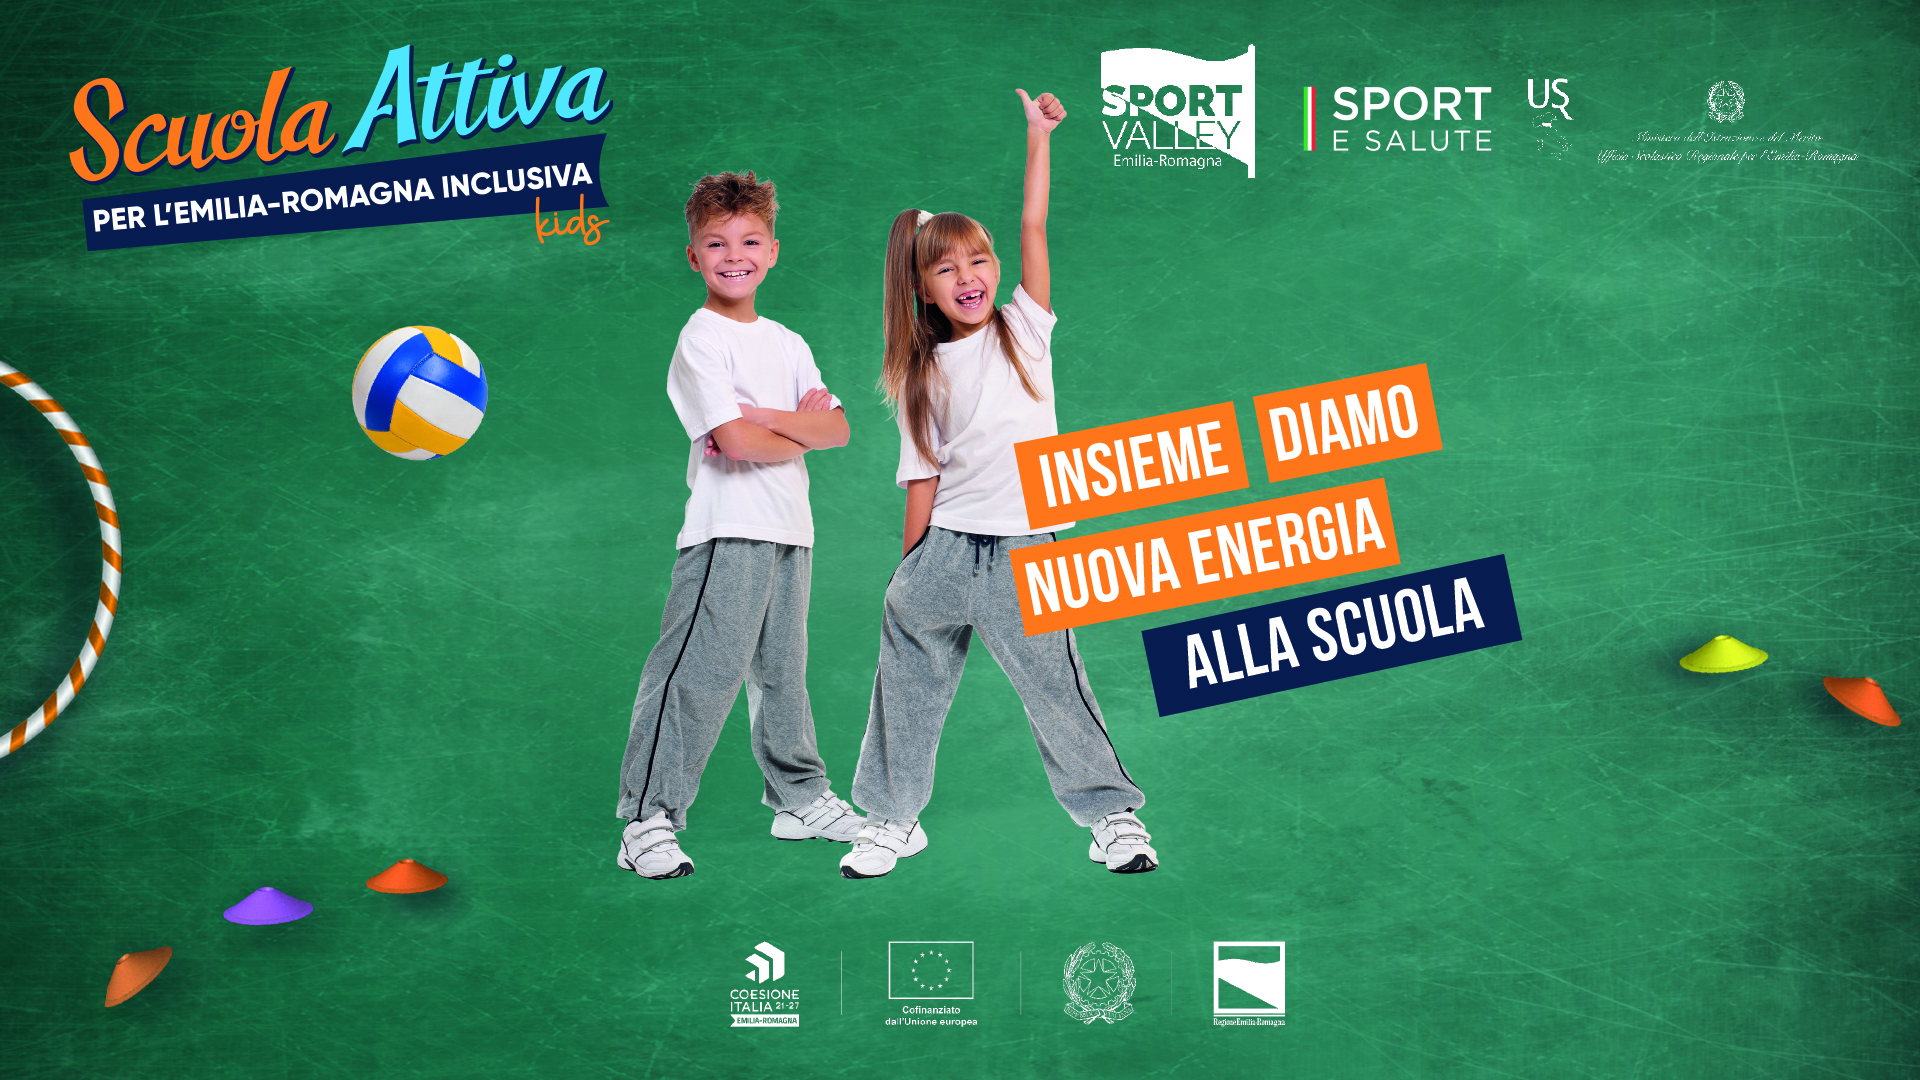 “Emilia-Romagna Active Children’s School”.  Tomorrow in Bologna is the massive occasion on the finish of the challenge with 700 college students concerned